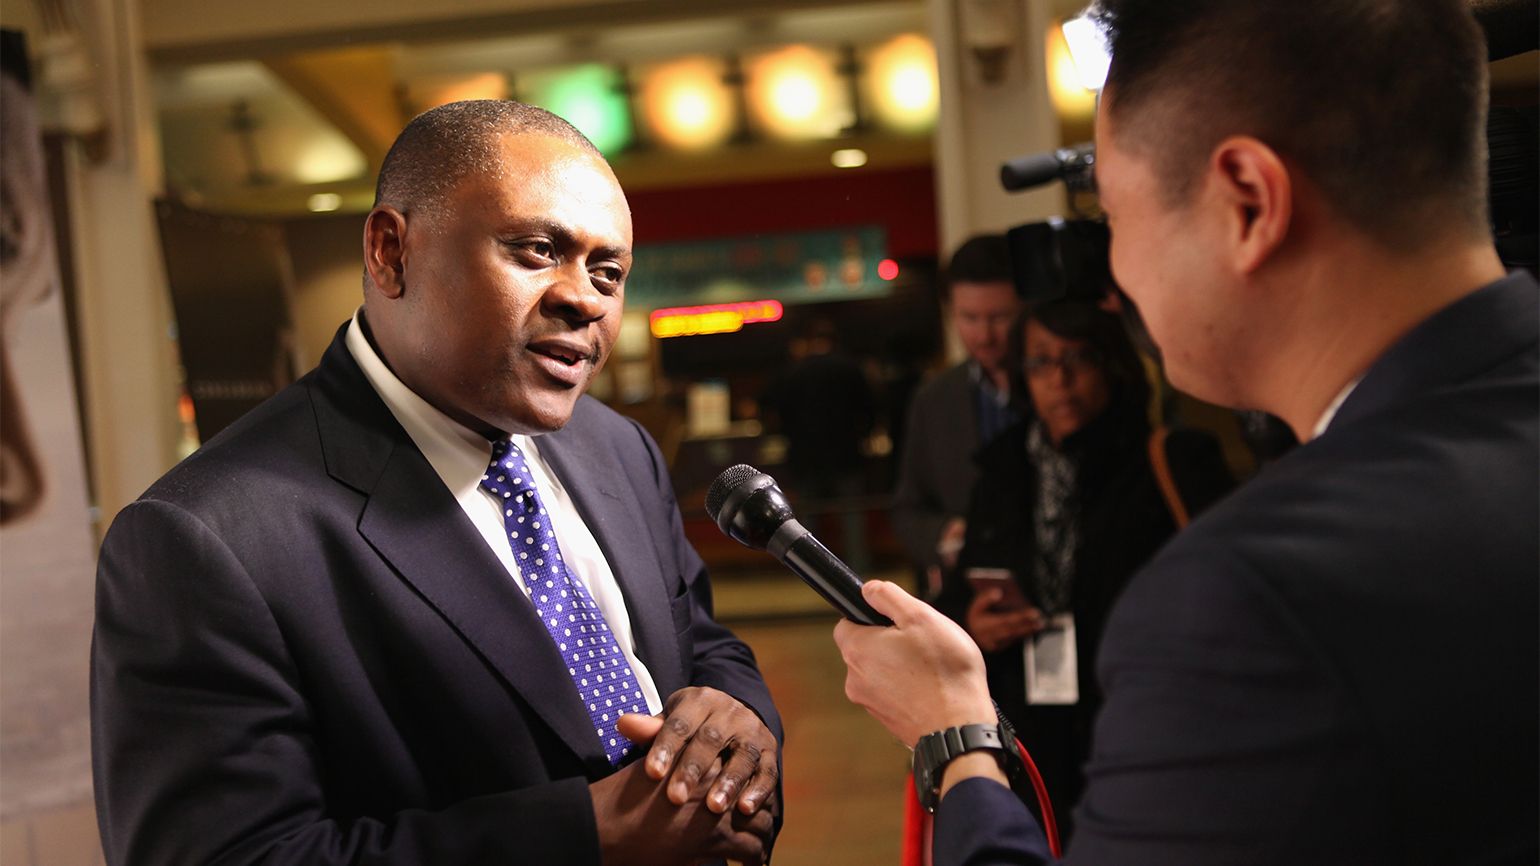 Dr. Bennet Omalu answers questions from the press